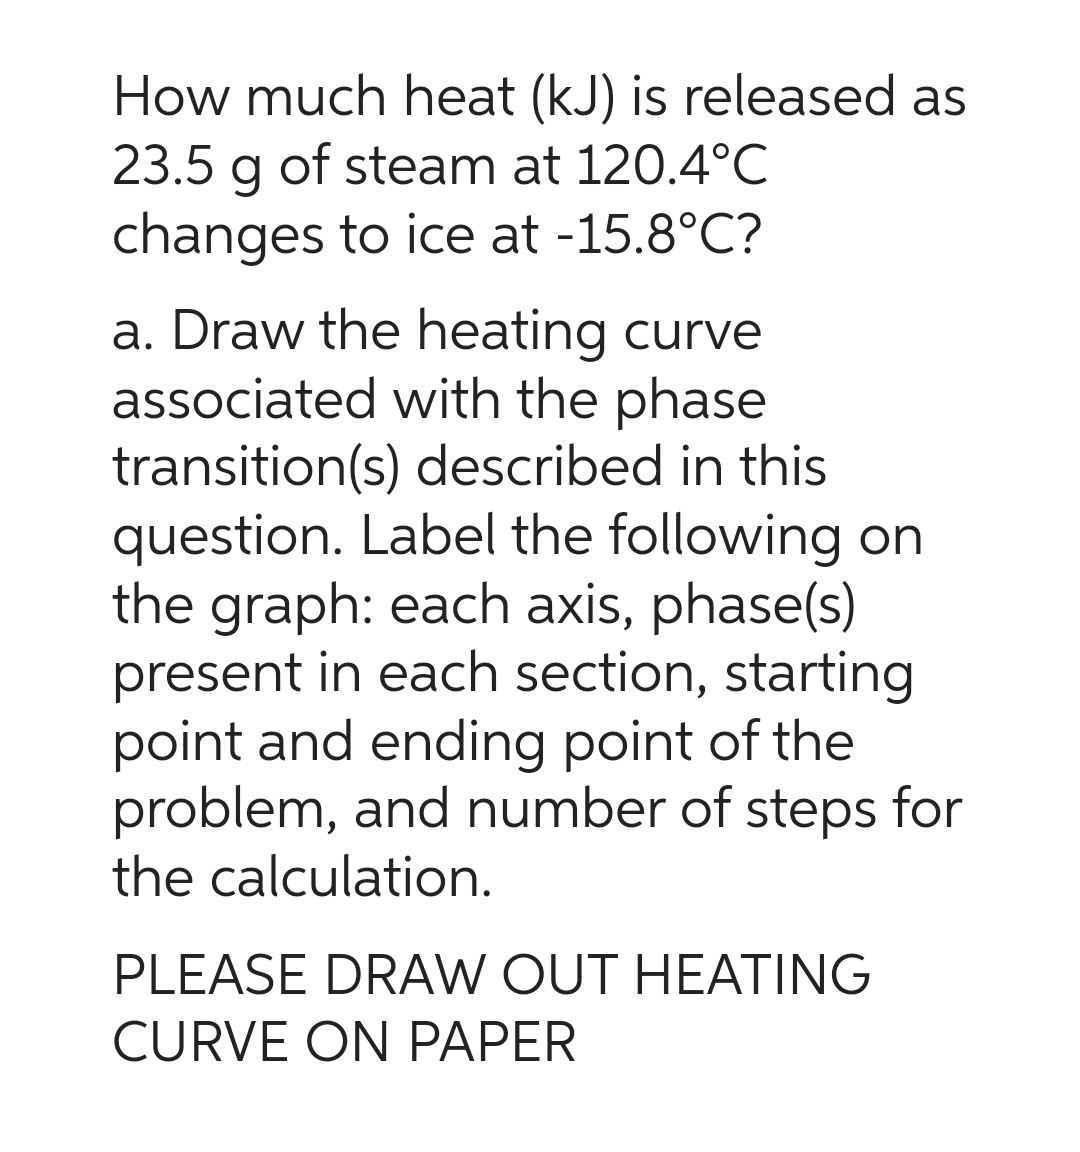 How much heat (kJ) is released as
23.5 g of steam at 120.4°C
changes to ice at -15.8°C?
a. Draw the heating curve
associated with the phase
transition(s) described in this
question. Label the following on
the graph: each axis, phase(s)
present in each section, starting
point and ending point of the
problem, and number of steps for
the calculation.
PLEASE DRAW OUT HEATING
CURVE ON PAPER